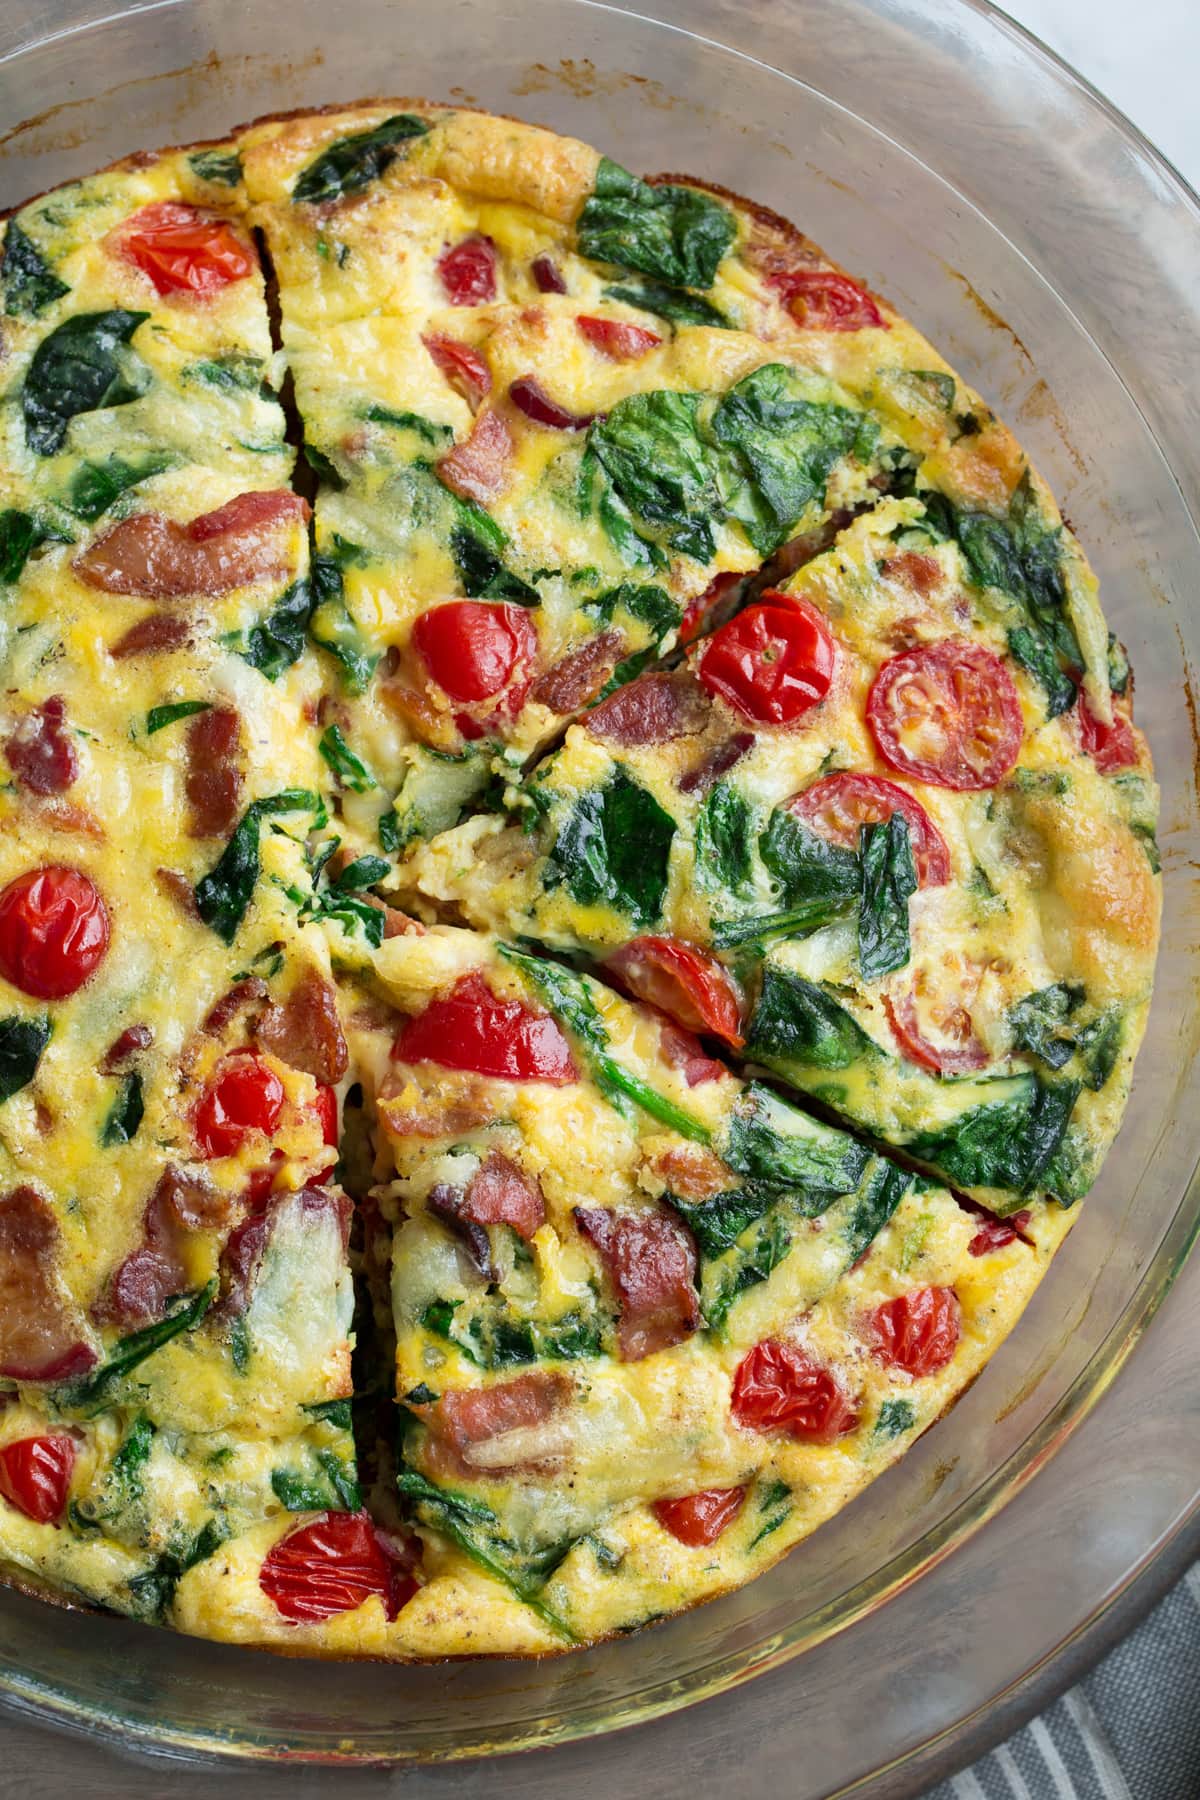 Frittata in a glass pie plate set over a wooden surface.